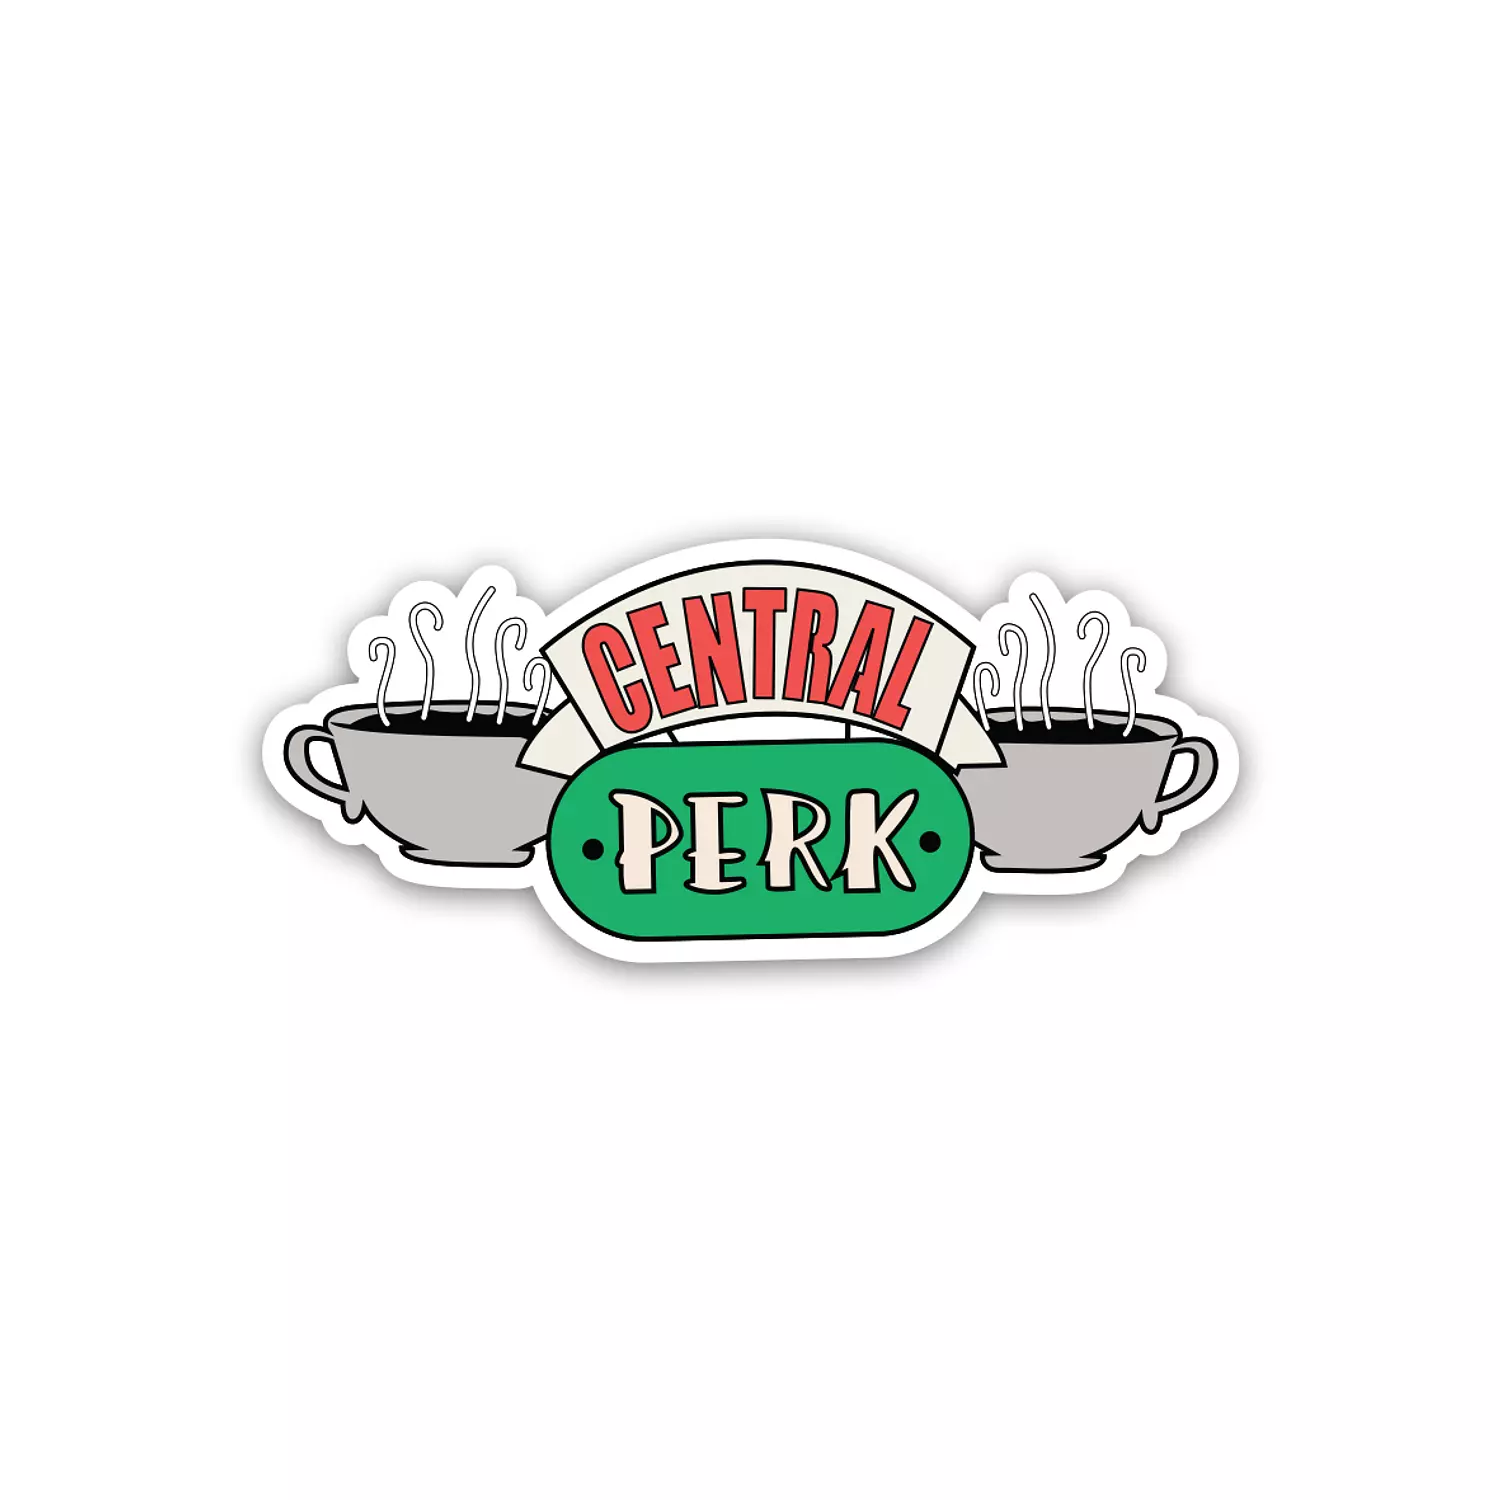 Central Perk - Friends  hover image